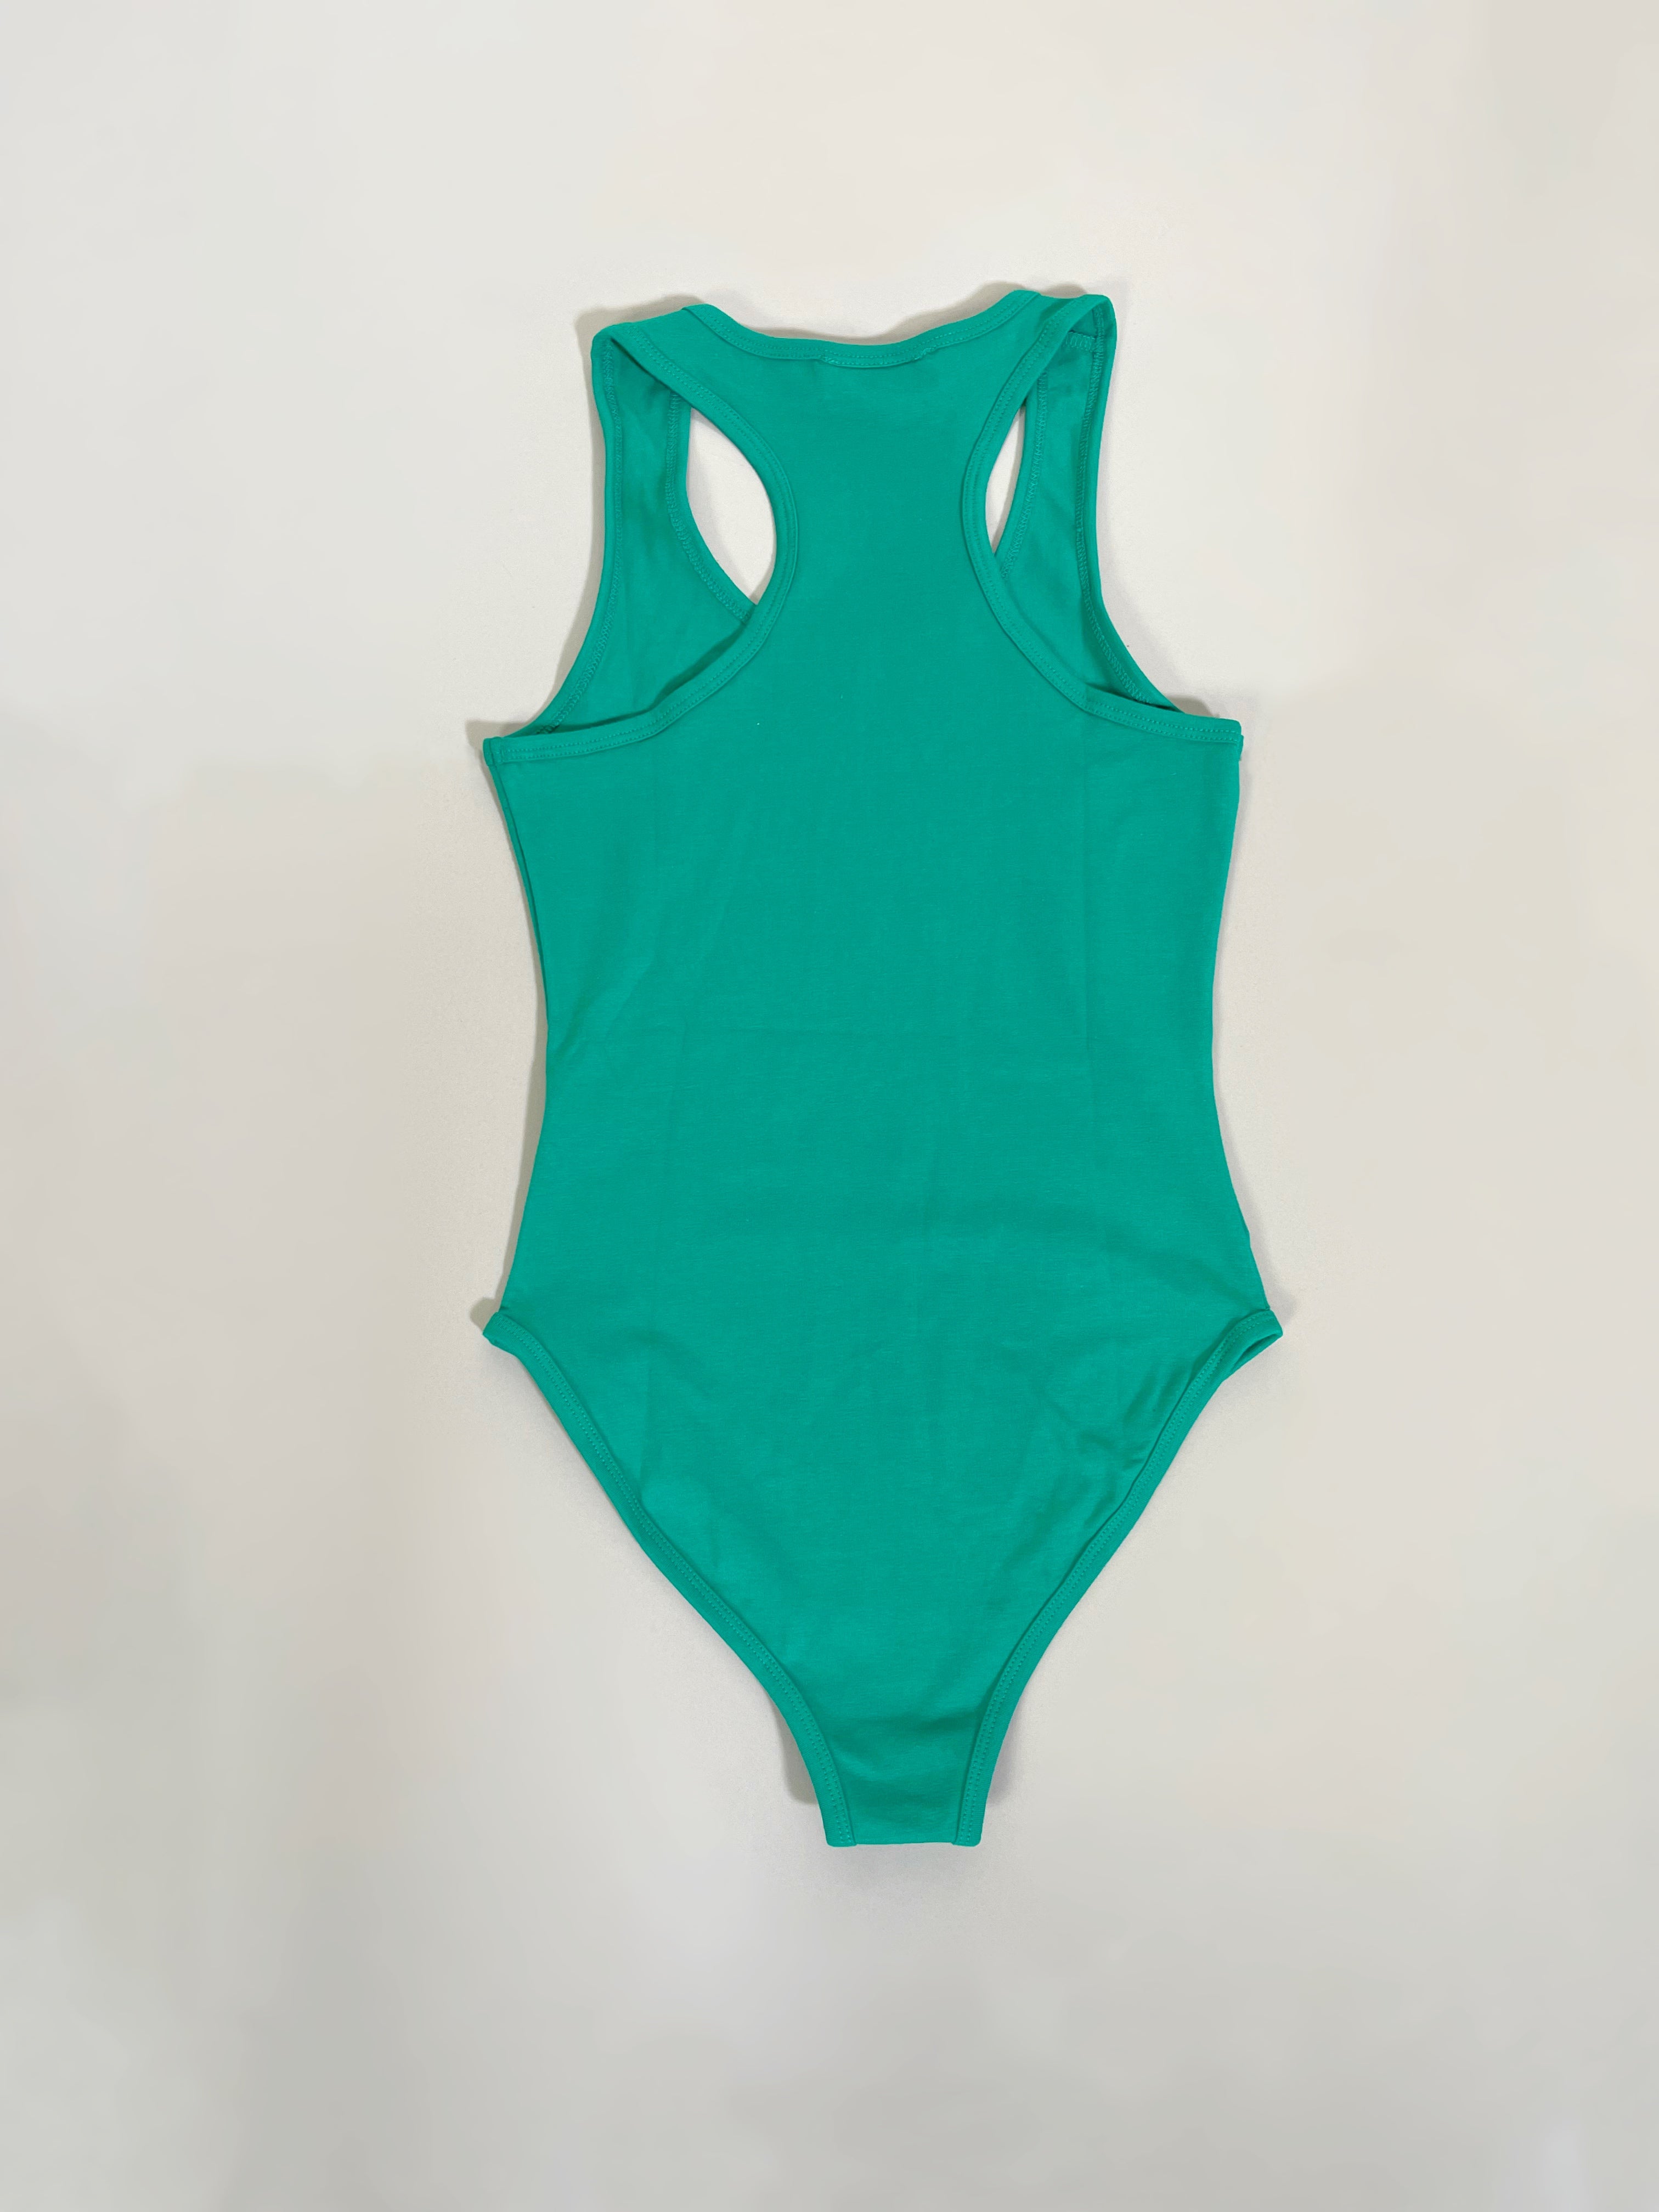 Day In, Day Out Bodysuit-Kelly Green - Impoze Style™